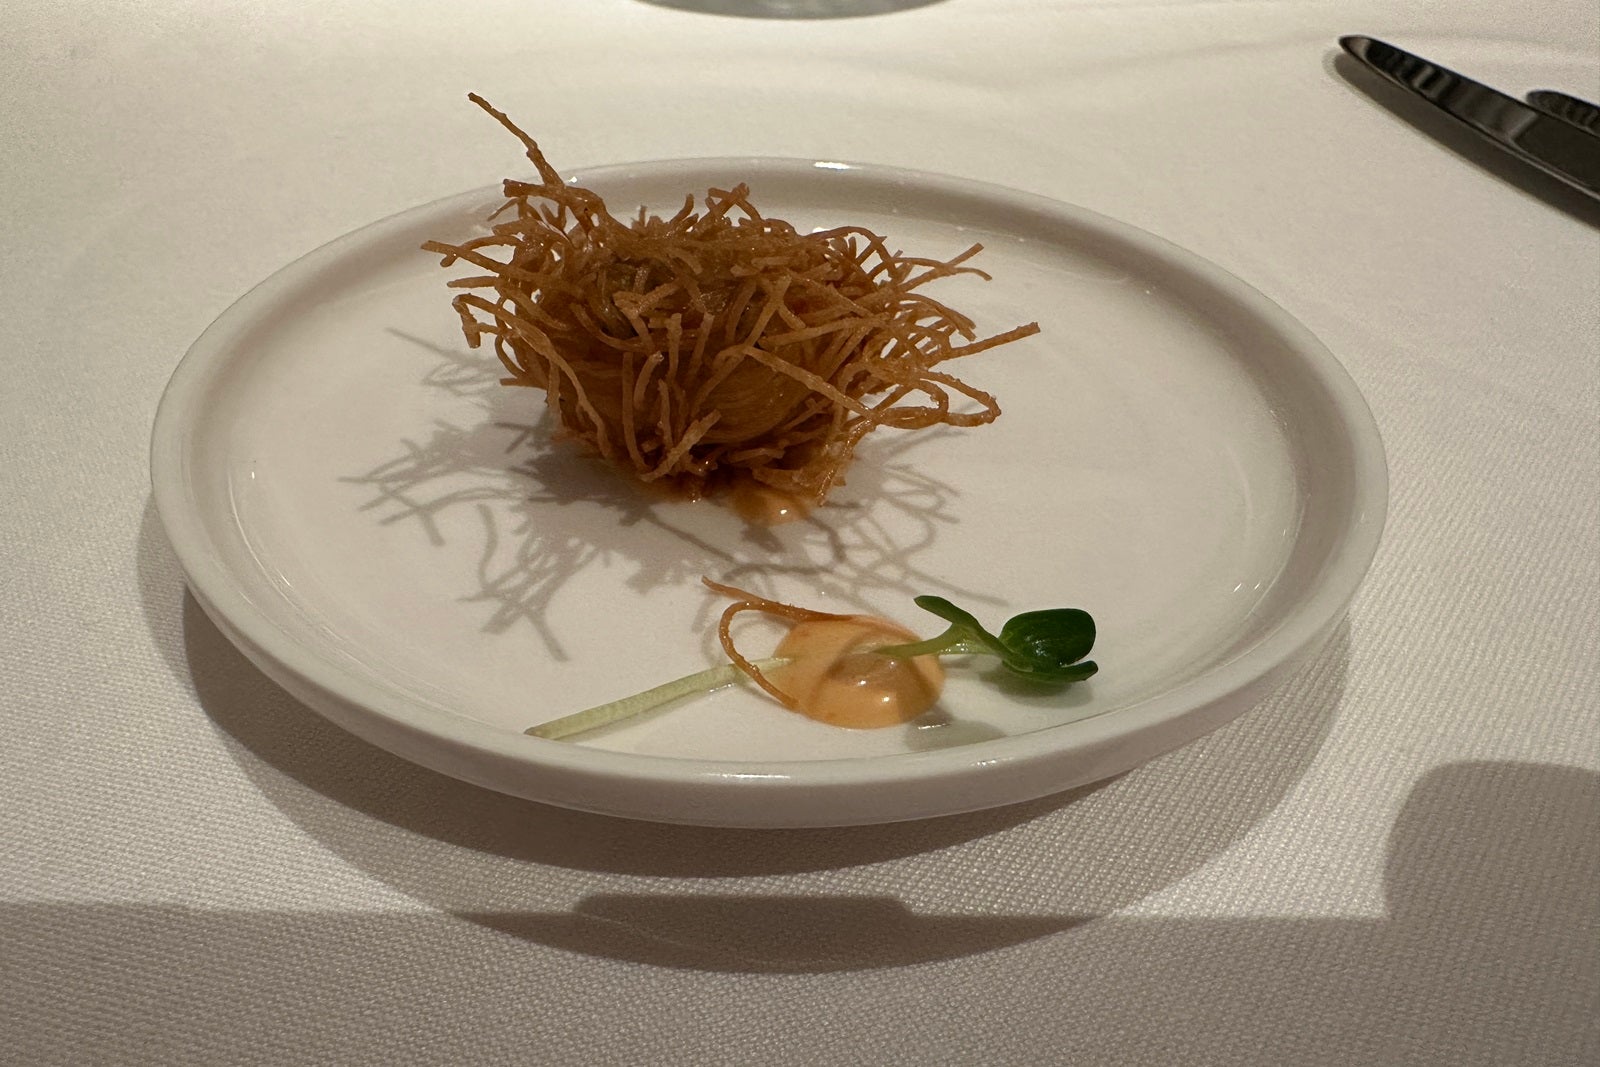 A spiny ball of fried shrimp on a white plate